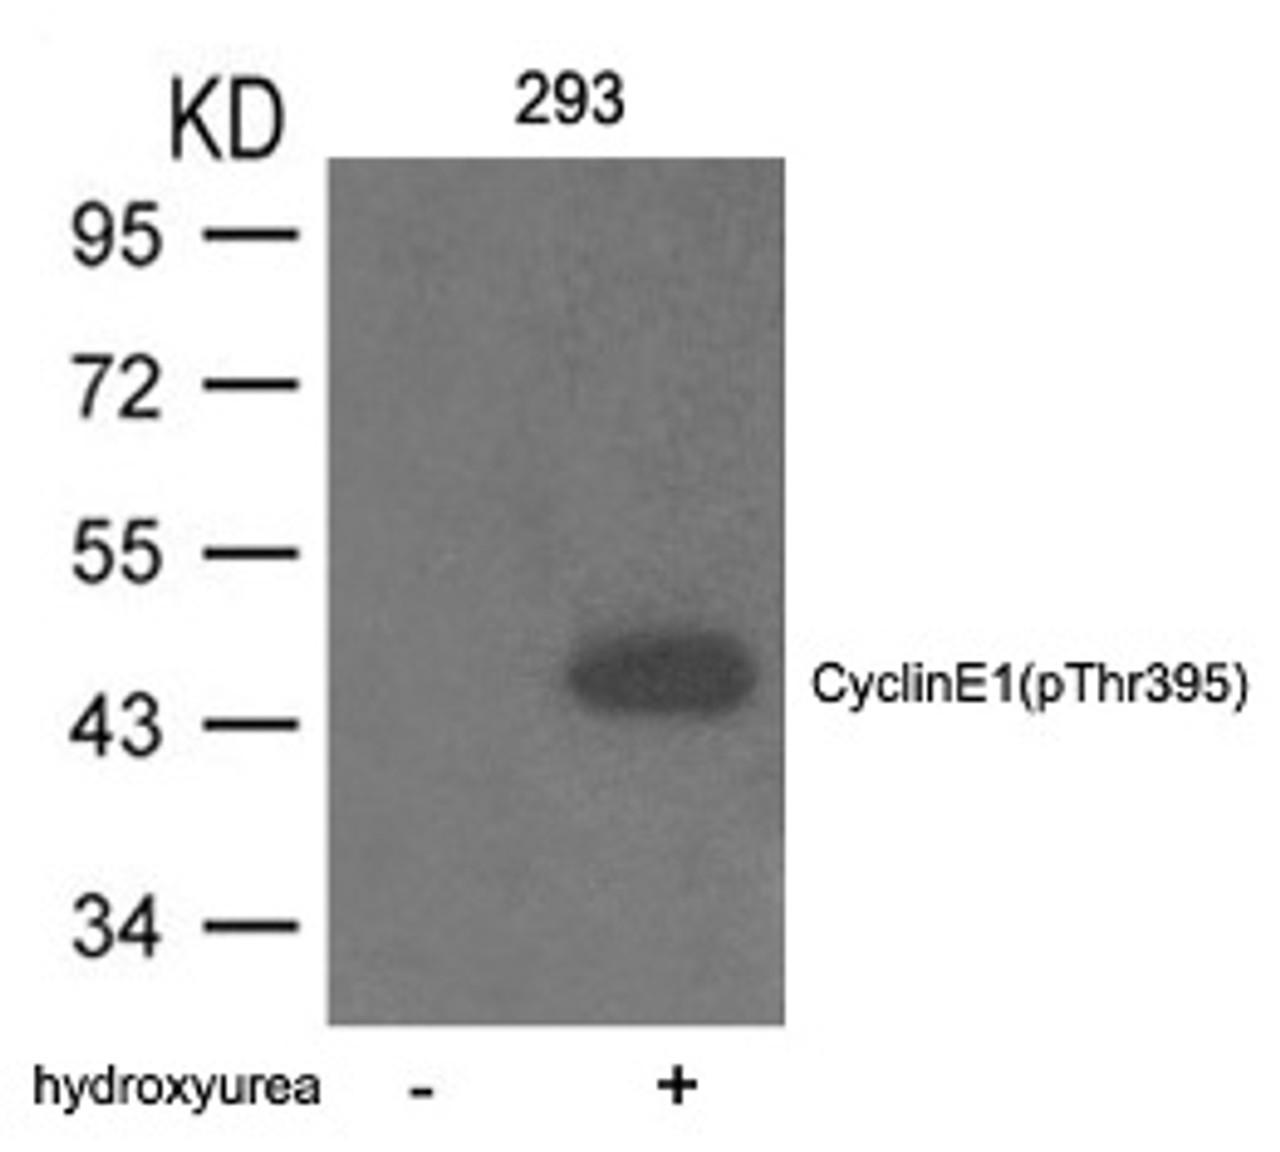 Western blot analysis of lysed extracts from 293 cells untreated or treated with hydroxyurea using Cyclin E1 (phospho-Thr395) .